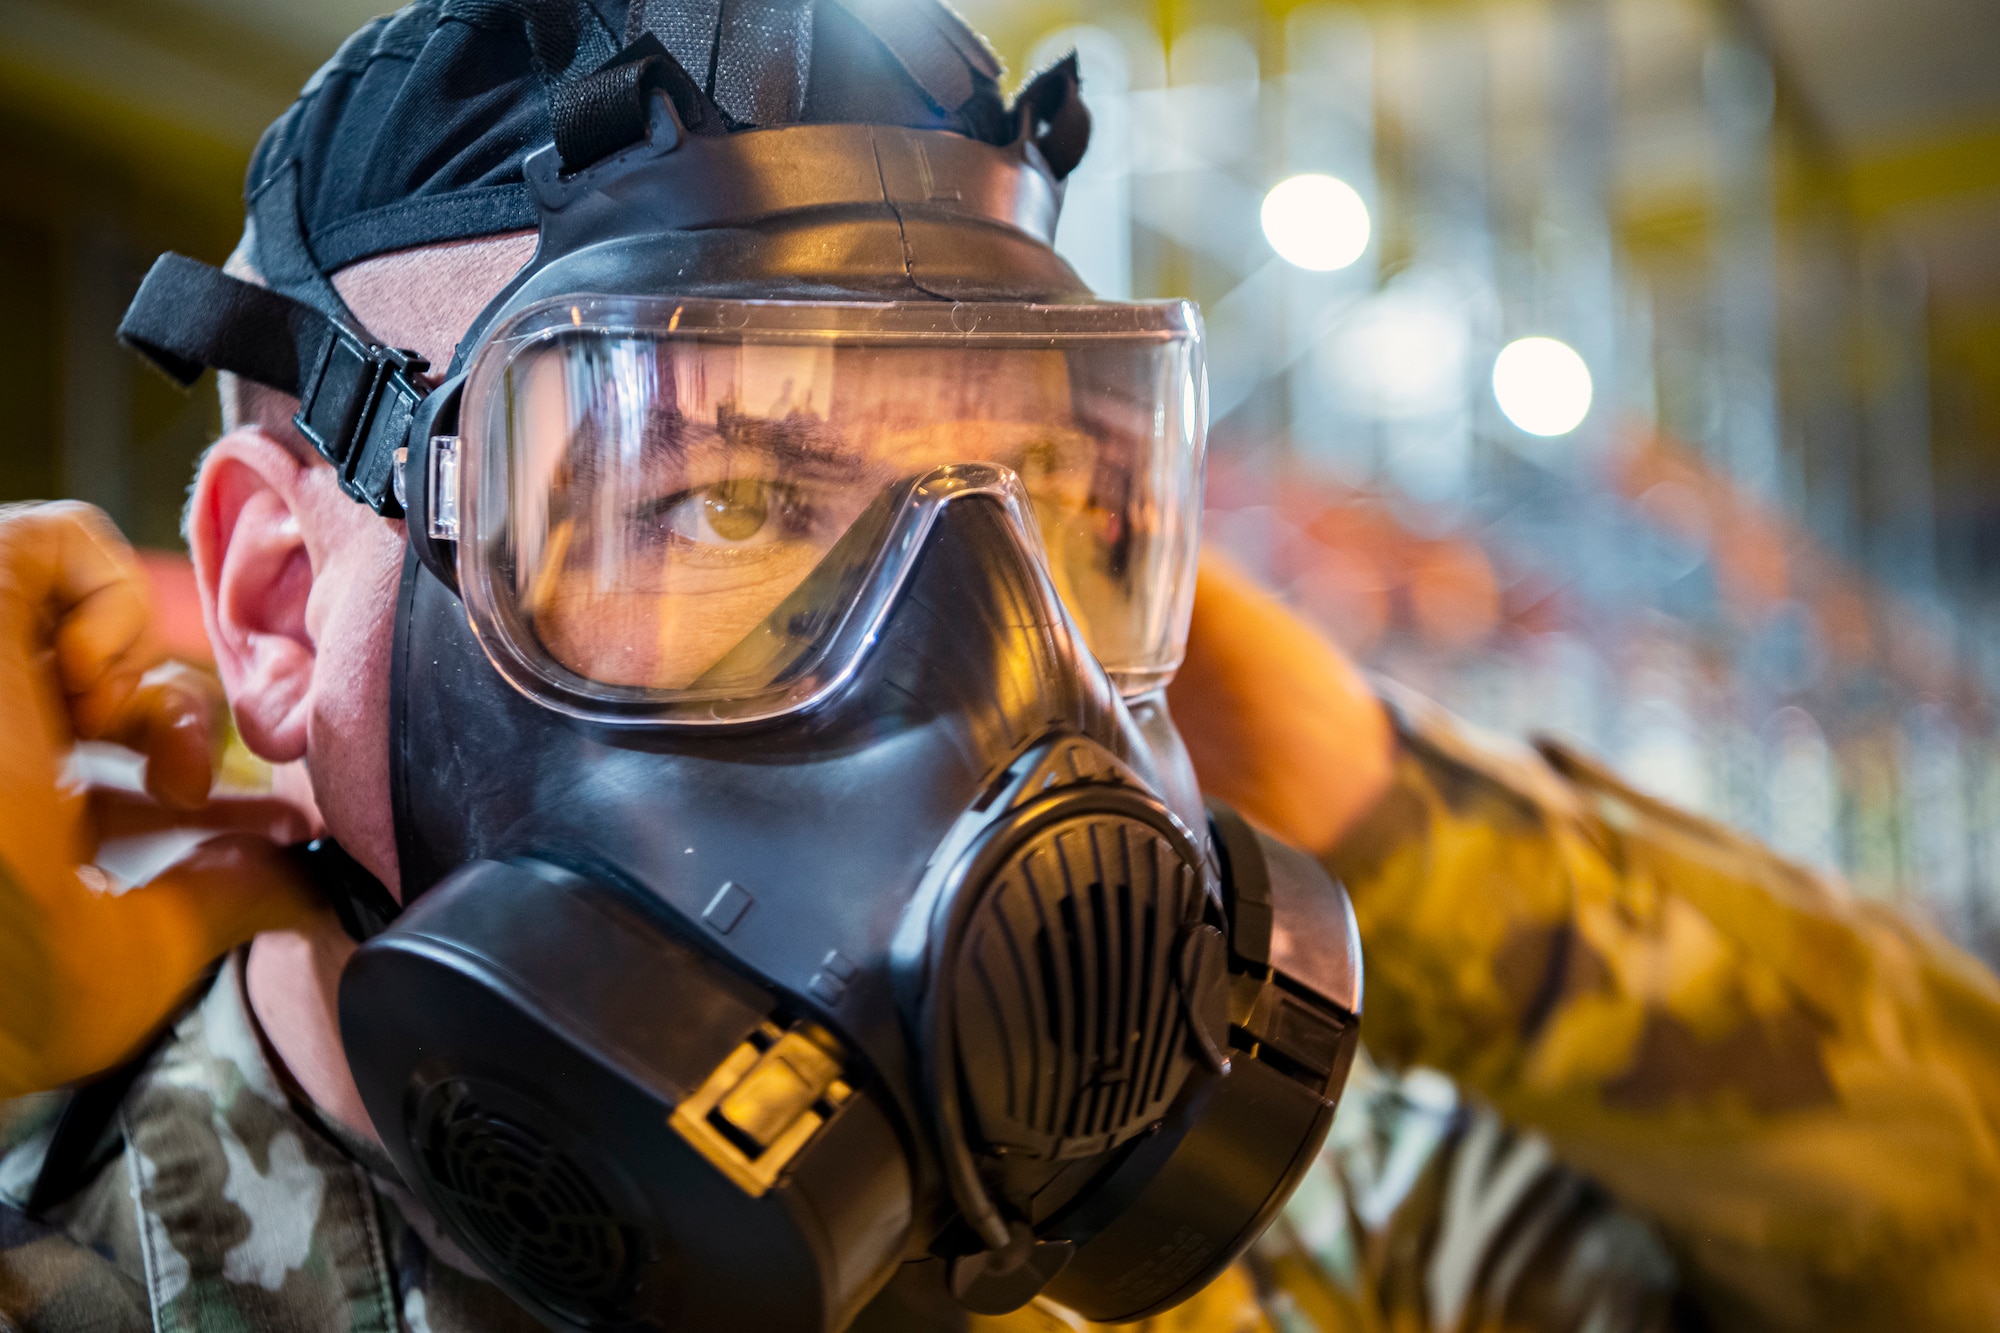 U.S. Air Force Senior Master Sgt. Kyle Mullen, 423d Communications Squadron superintendent, adjusts his gas mask during Ability to Survive and Operate training at RAF Alconbury, England, Aug. 27, 2021. The ATSO rodeo was designed to reinforce Airmen’s ability to properly utilize their MOPP gear in a potential chemical environment. (U.S. Air Force photo by Senior Airman Eugene Oliver)